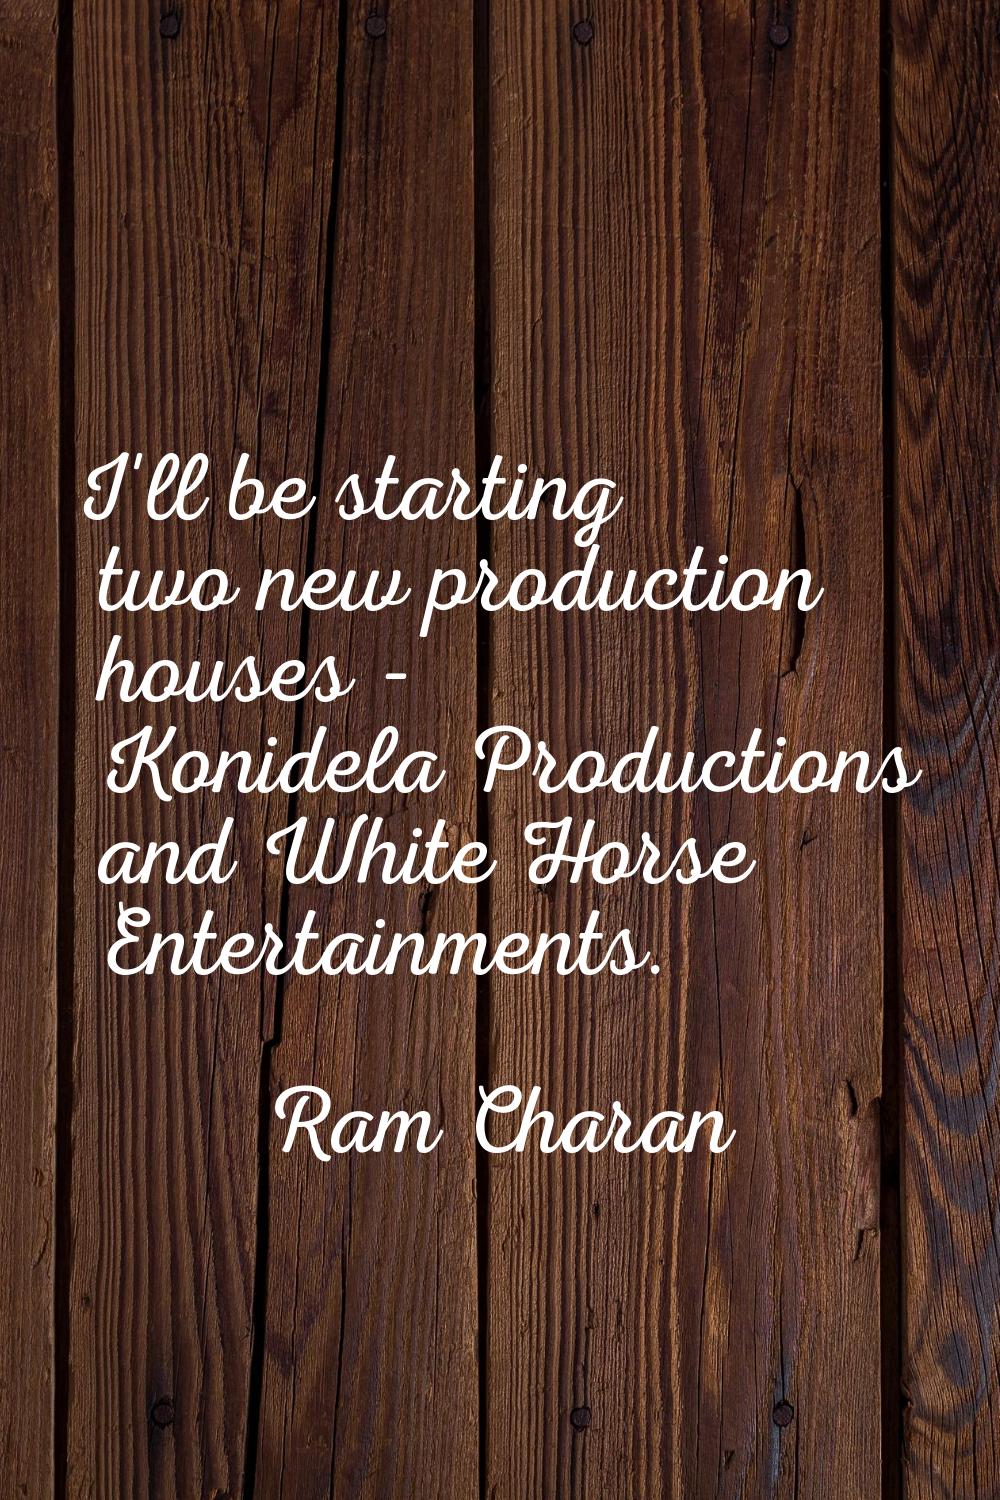 I'll be starting two new production houses - Konidela Productions and White Horse Entertainments.